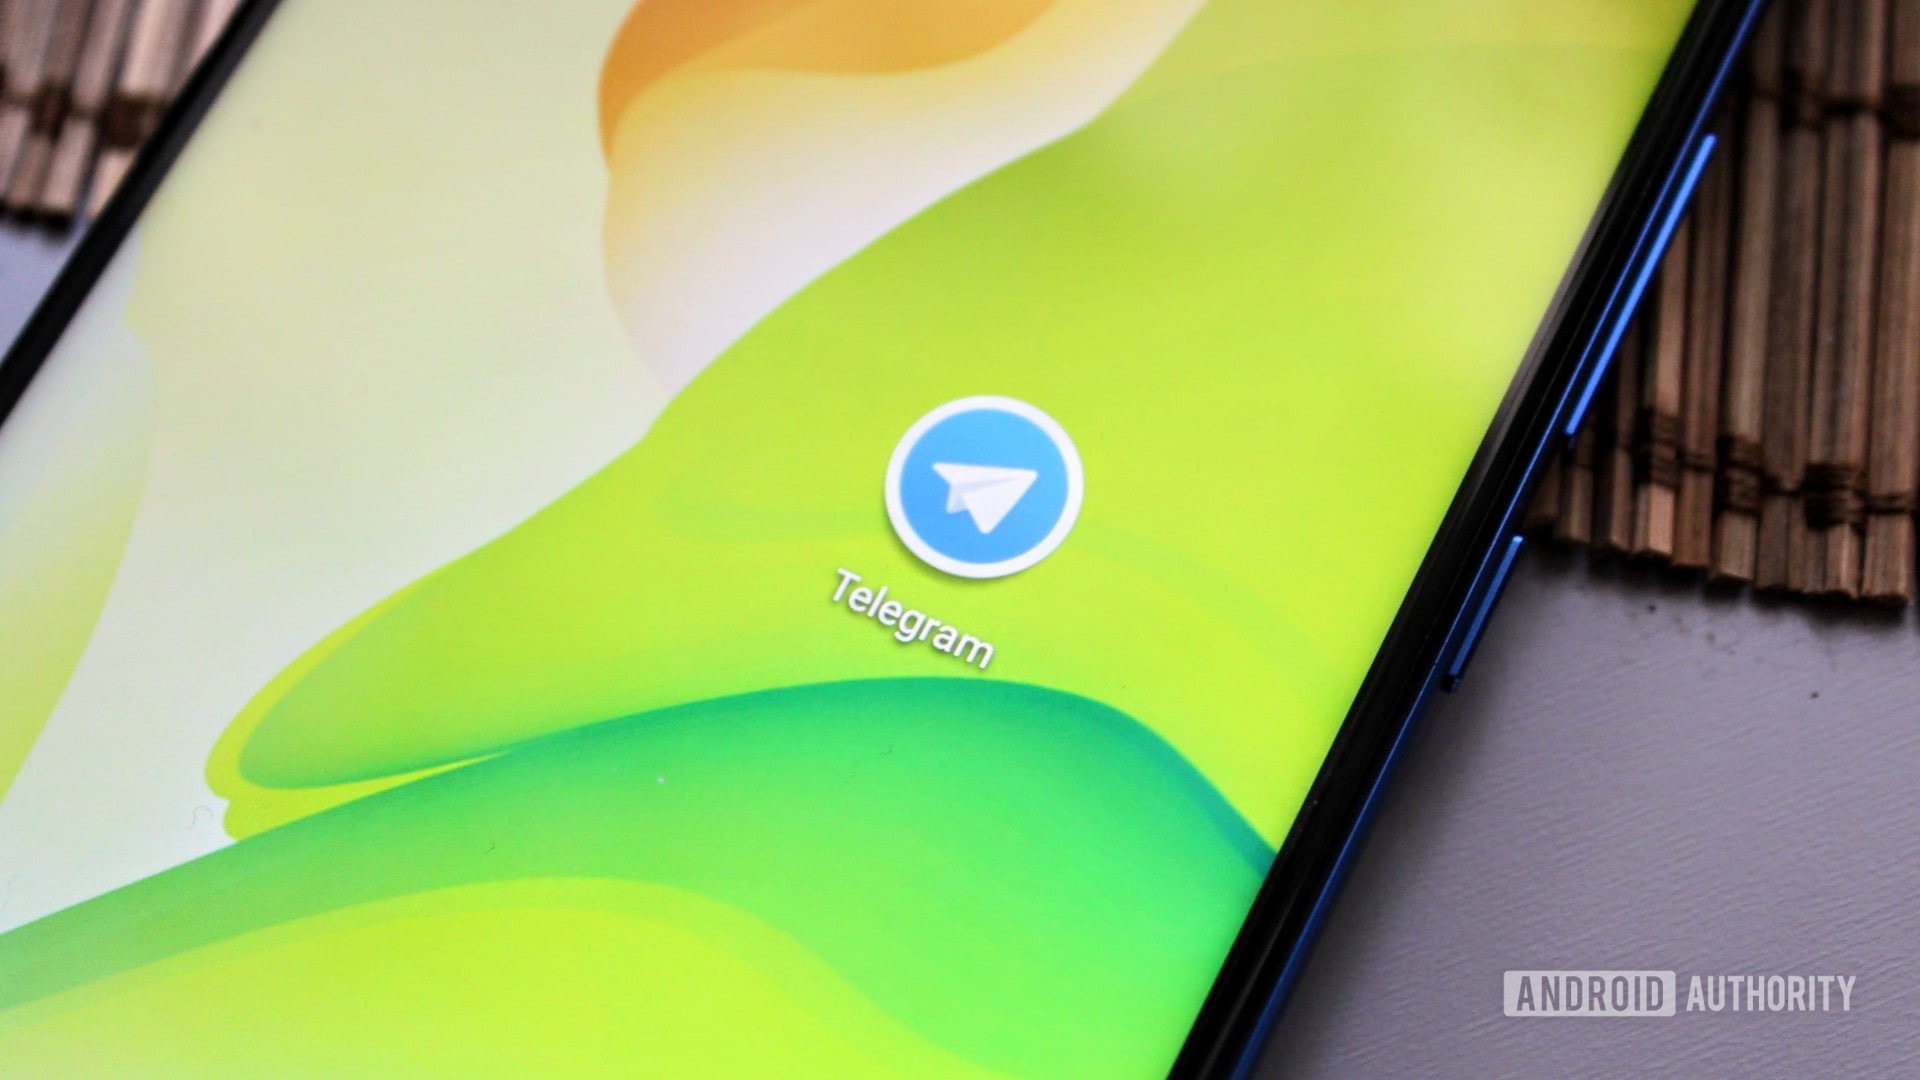 The Telegram icon on an Honor View 20 on a green background.